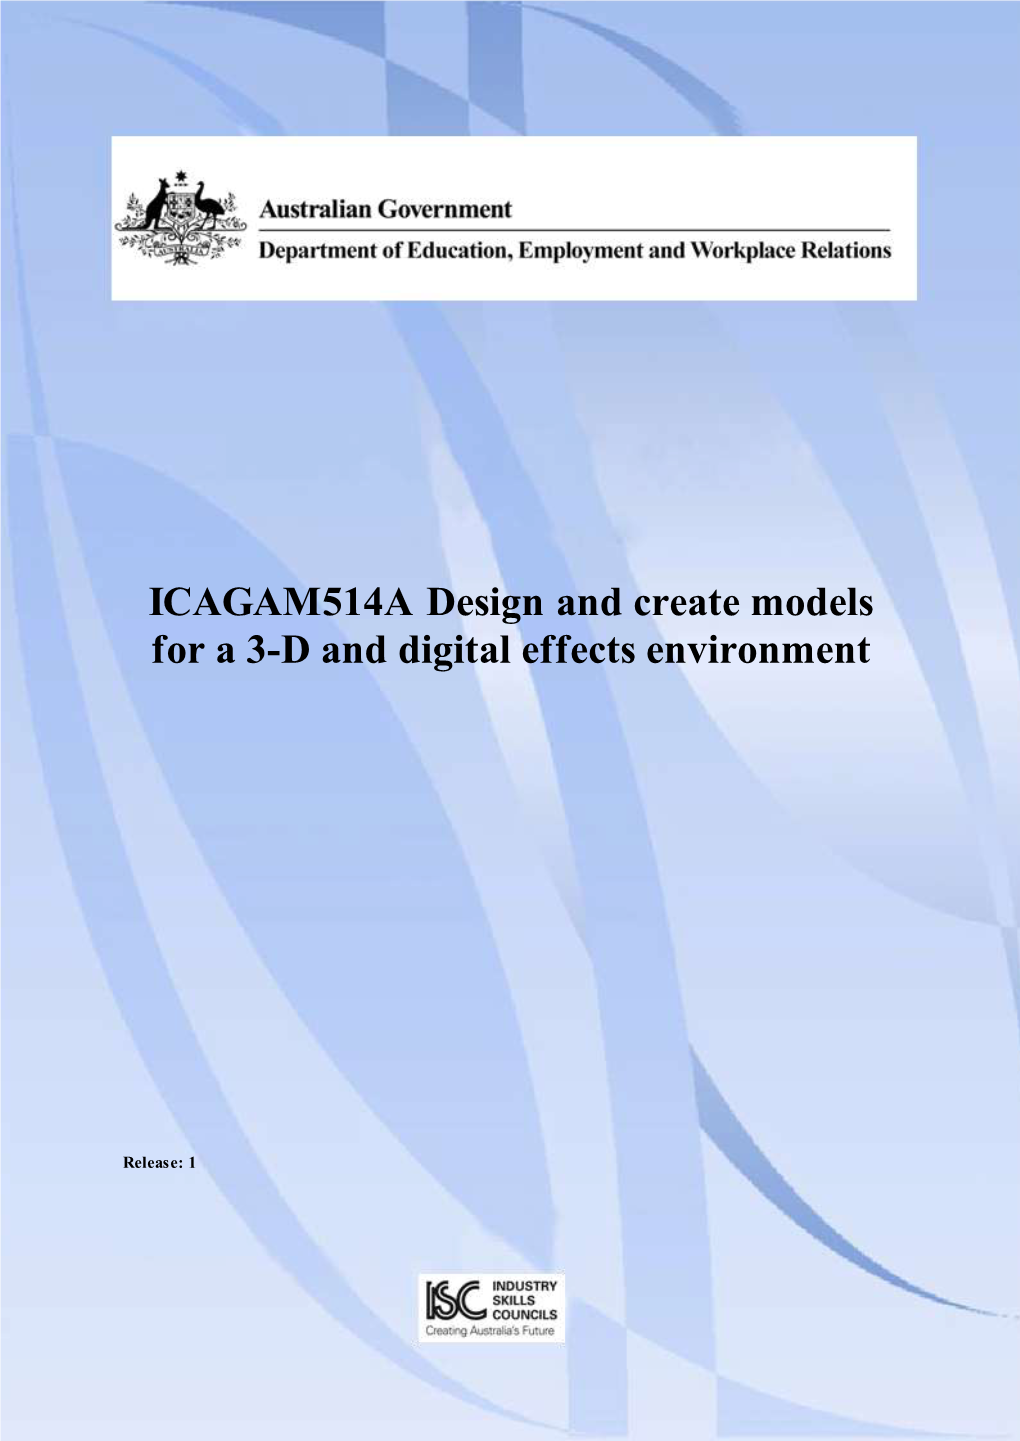 ICAGAM514A Design and Create Models for a 3-D and Digital Effects Environment